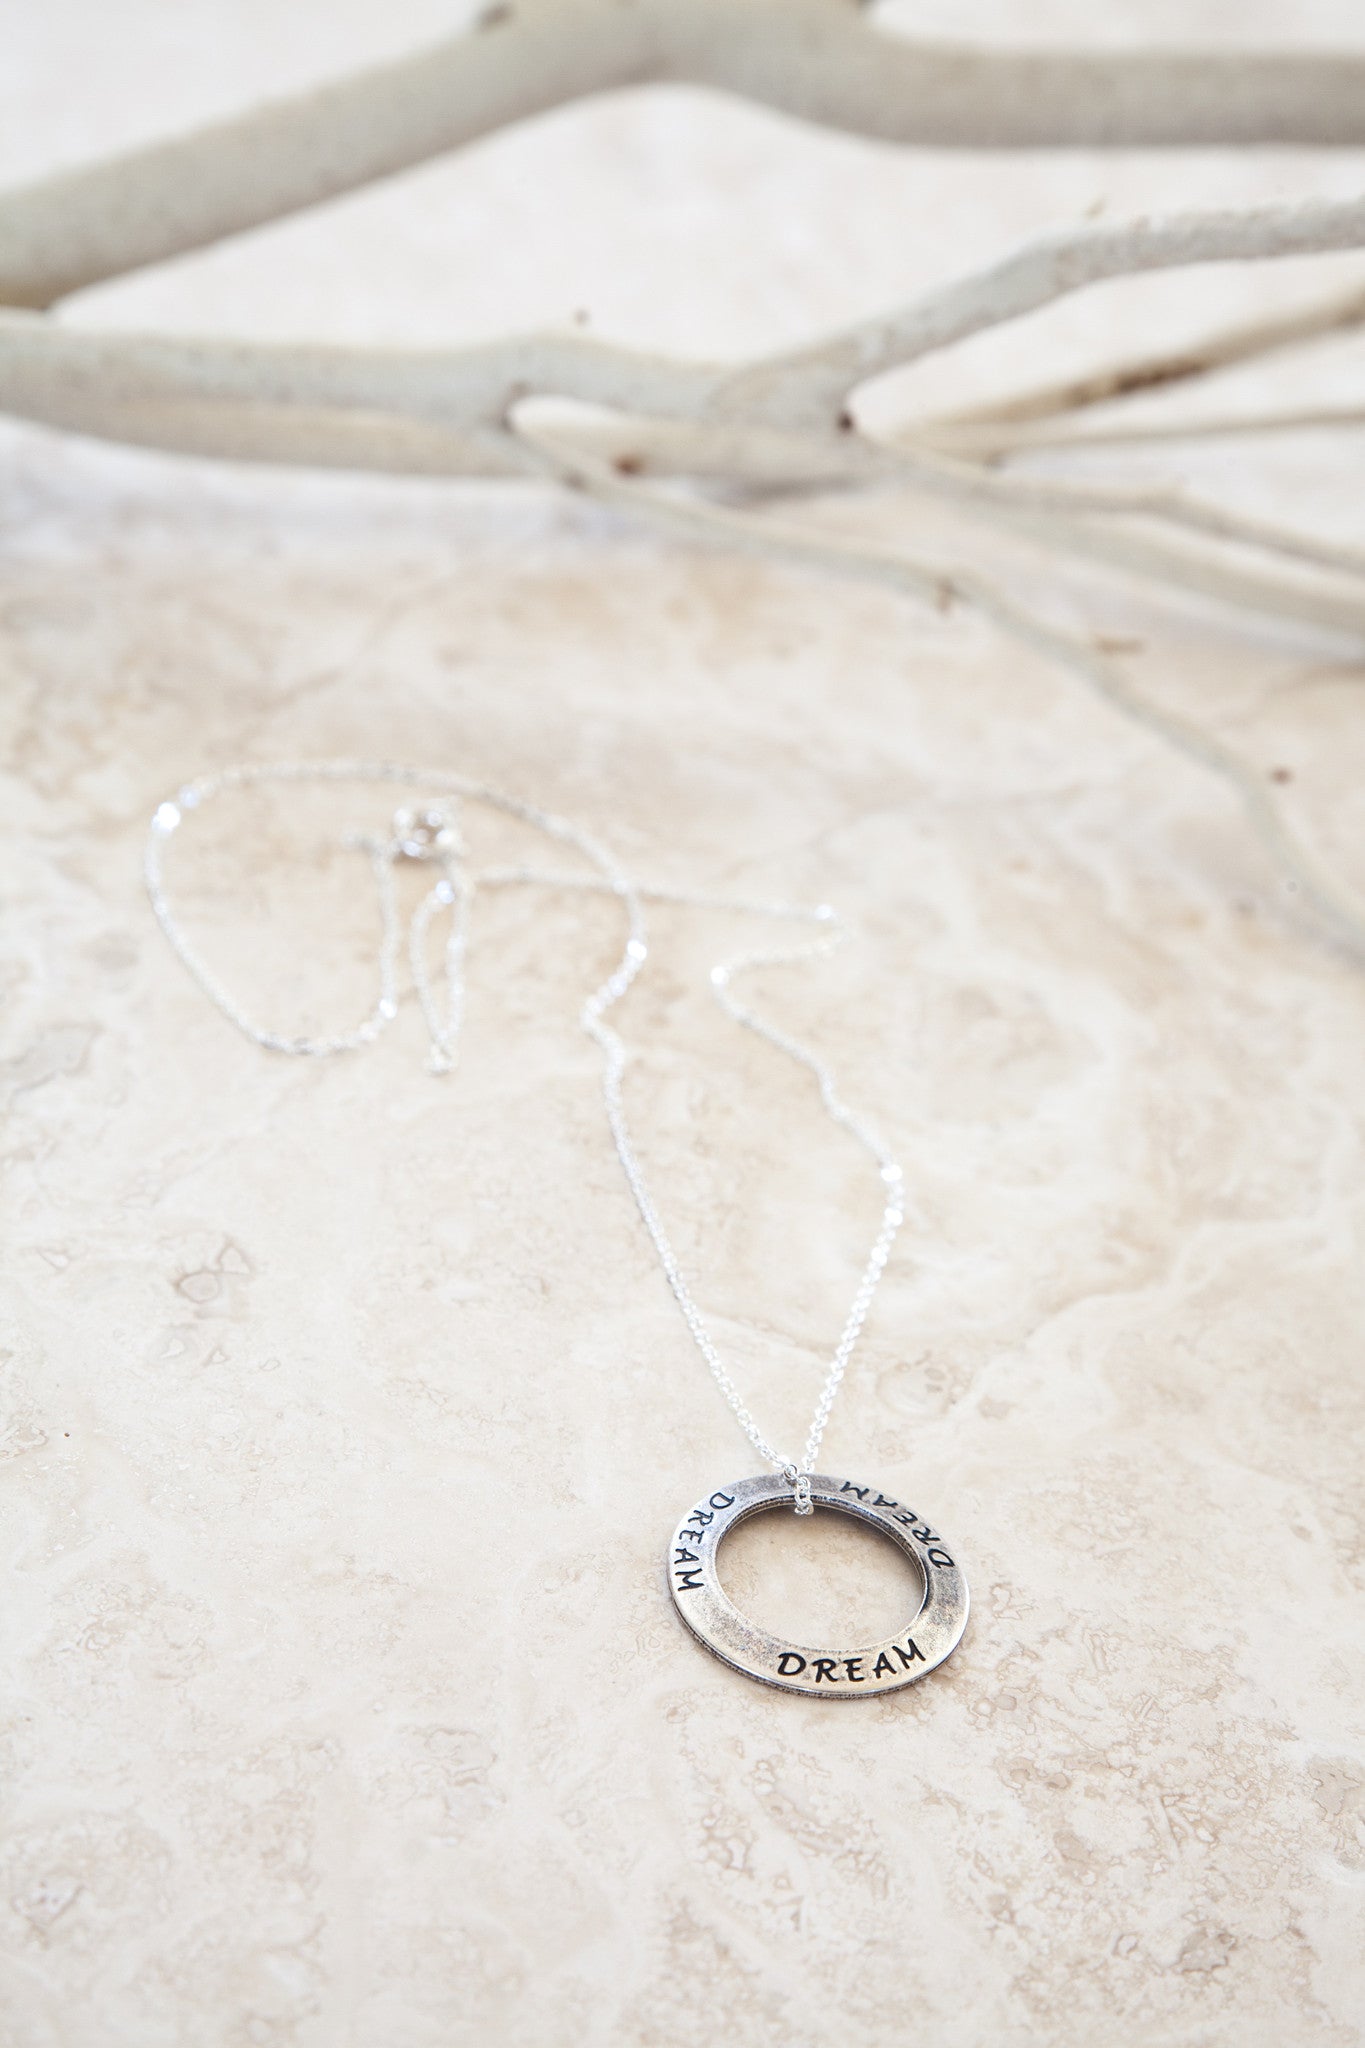 Delicate Sterling Silver and Silver Plated Dream Necklace